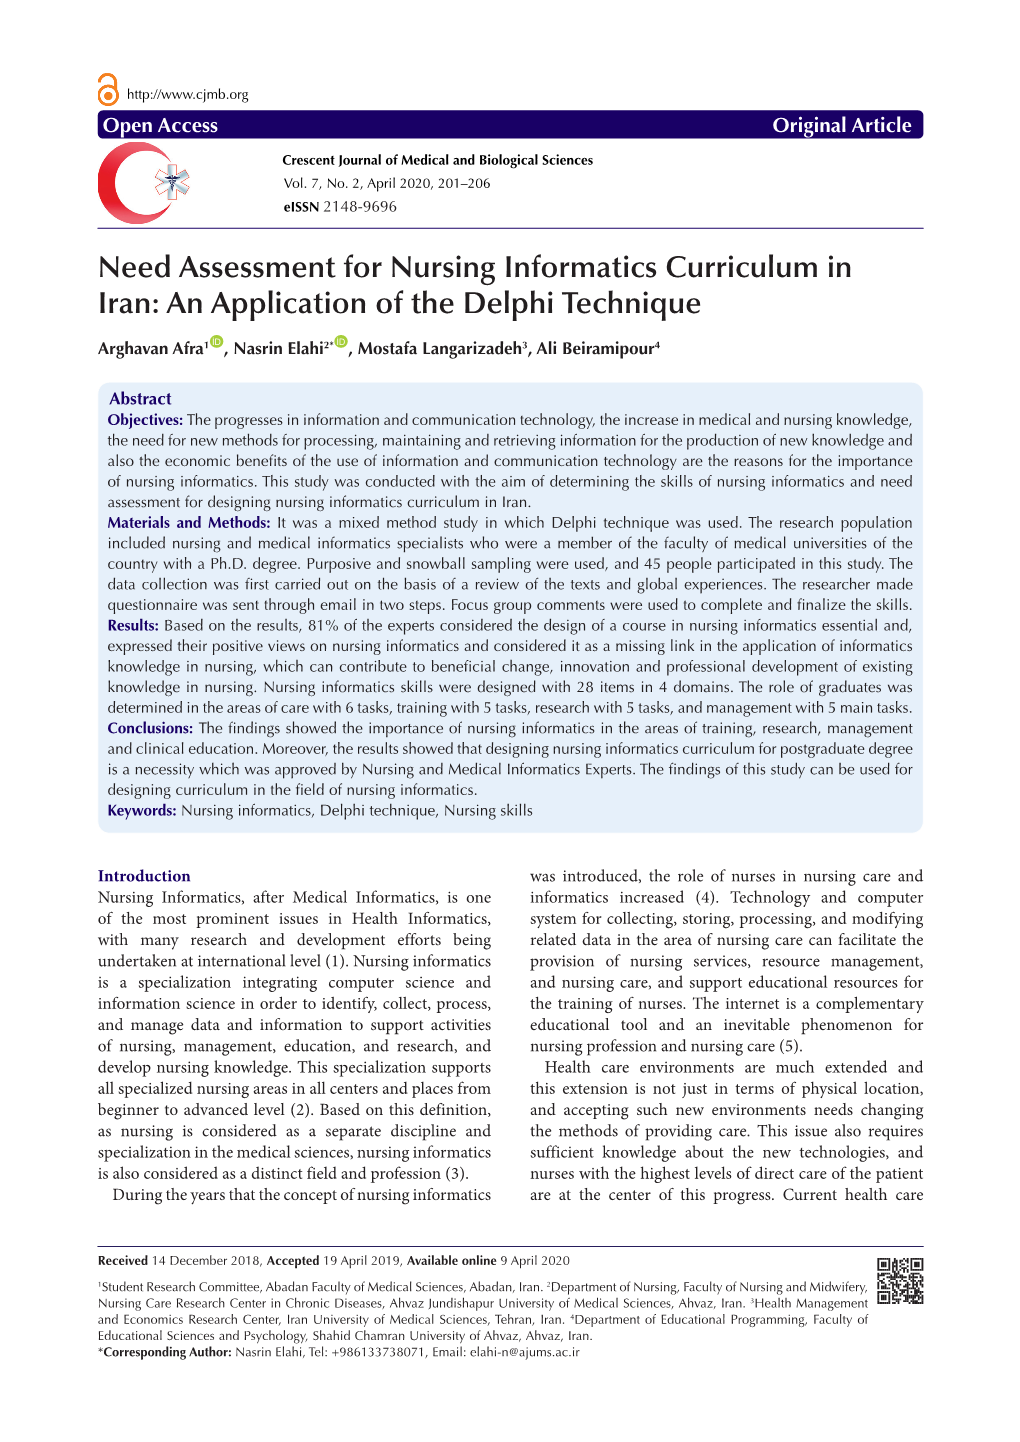 Need Assessment for Nursing Informatics Curriculum in Iran: an Application of the Delphi Technique